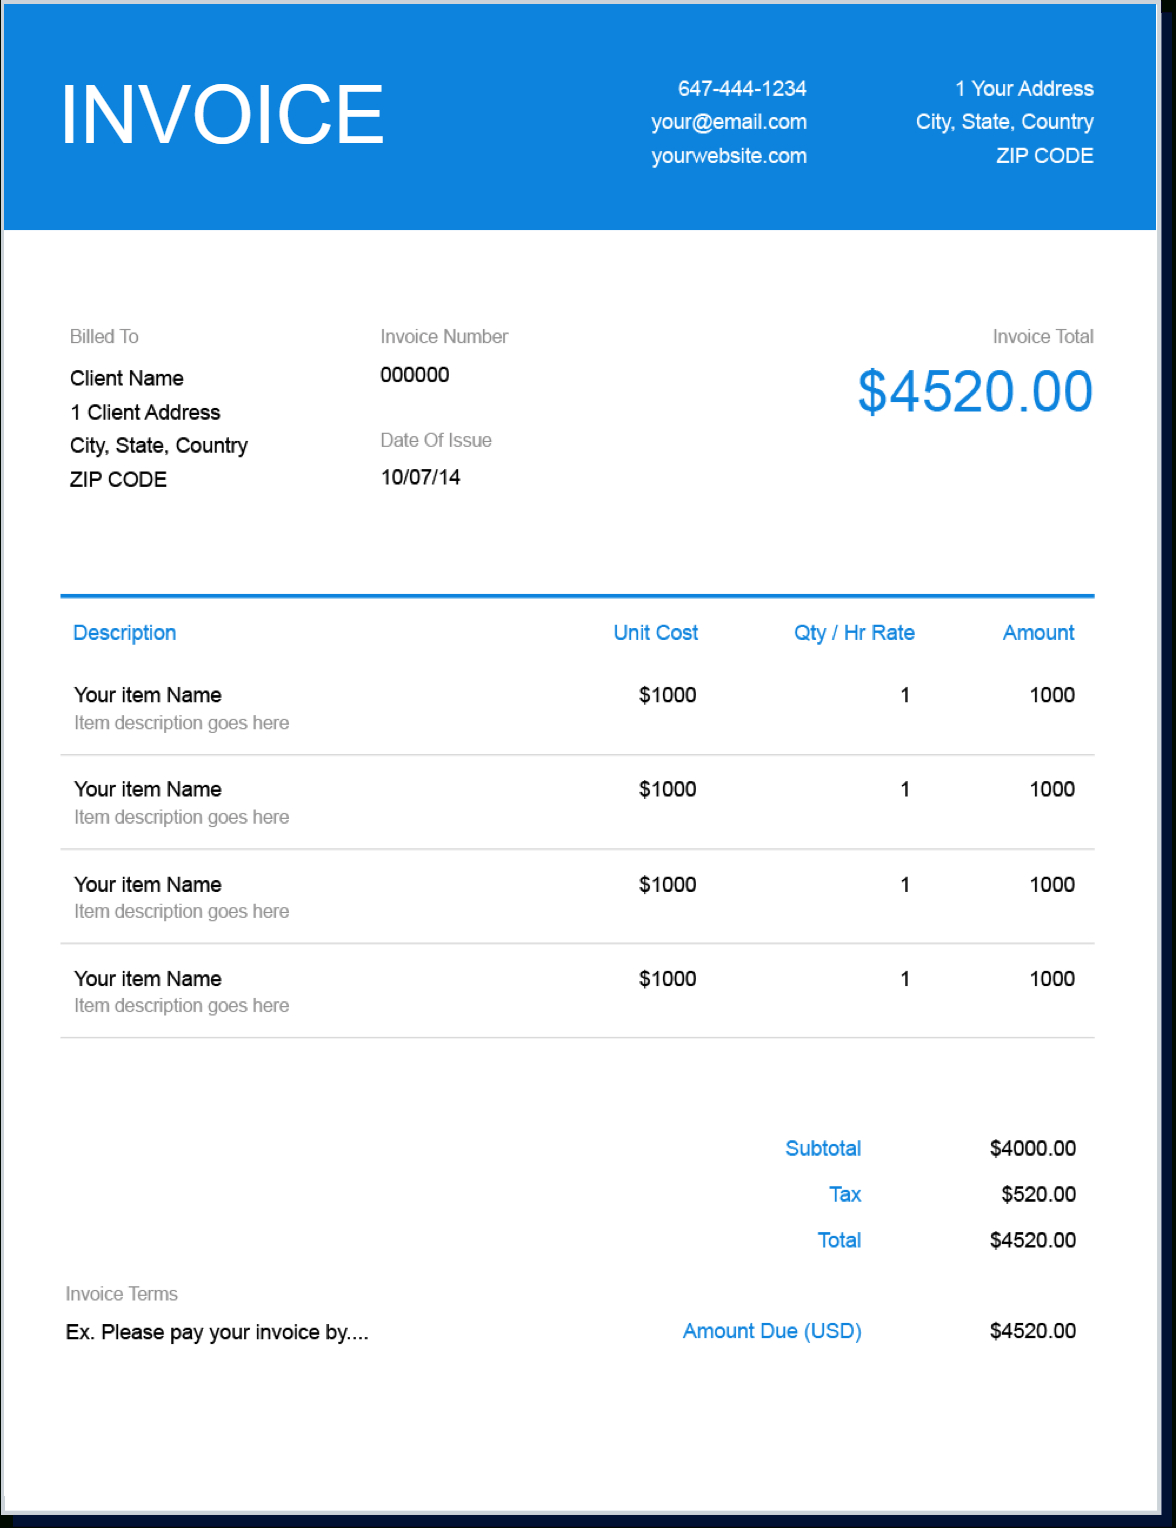 Invoice Template  Send In Minutes  Create Free Invoices Instantly inside Download An Invoice Template